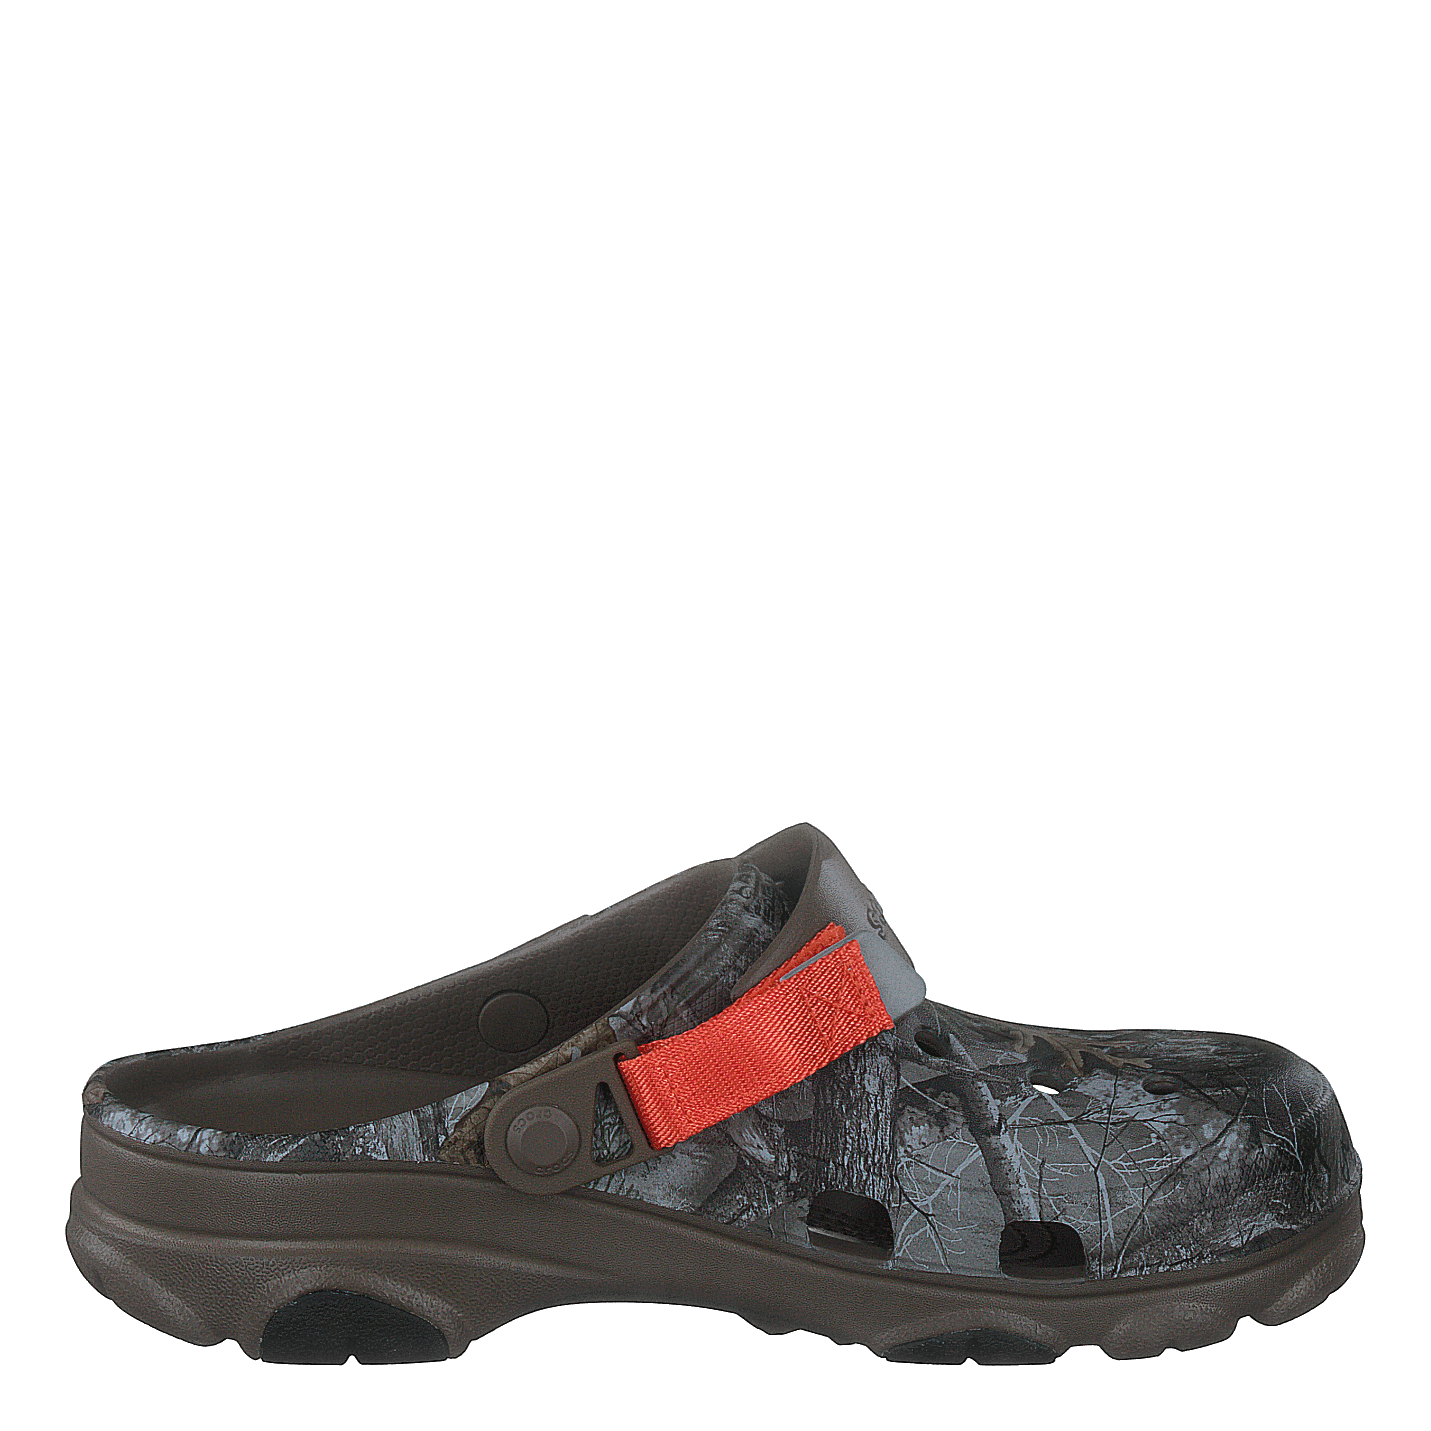 Classic All-Terrain Clog Real Tree / Brown